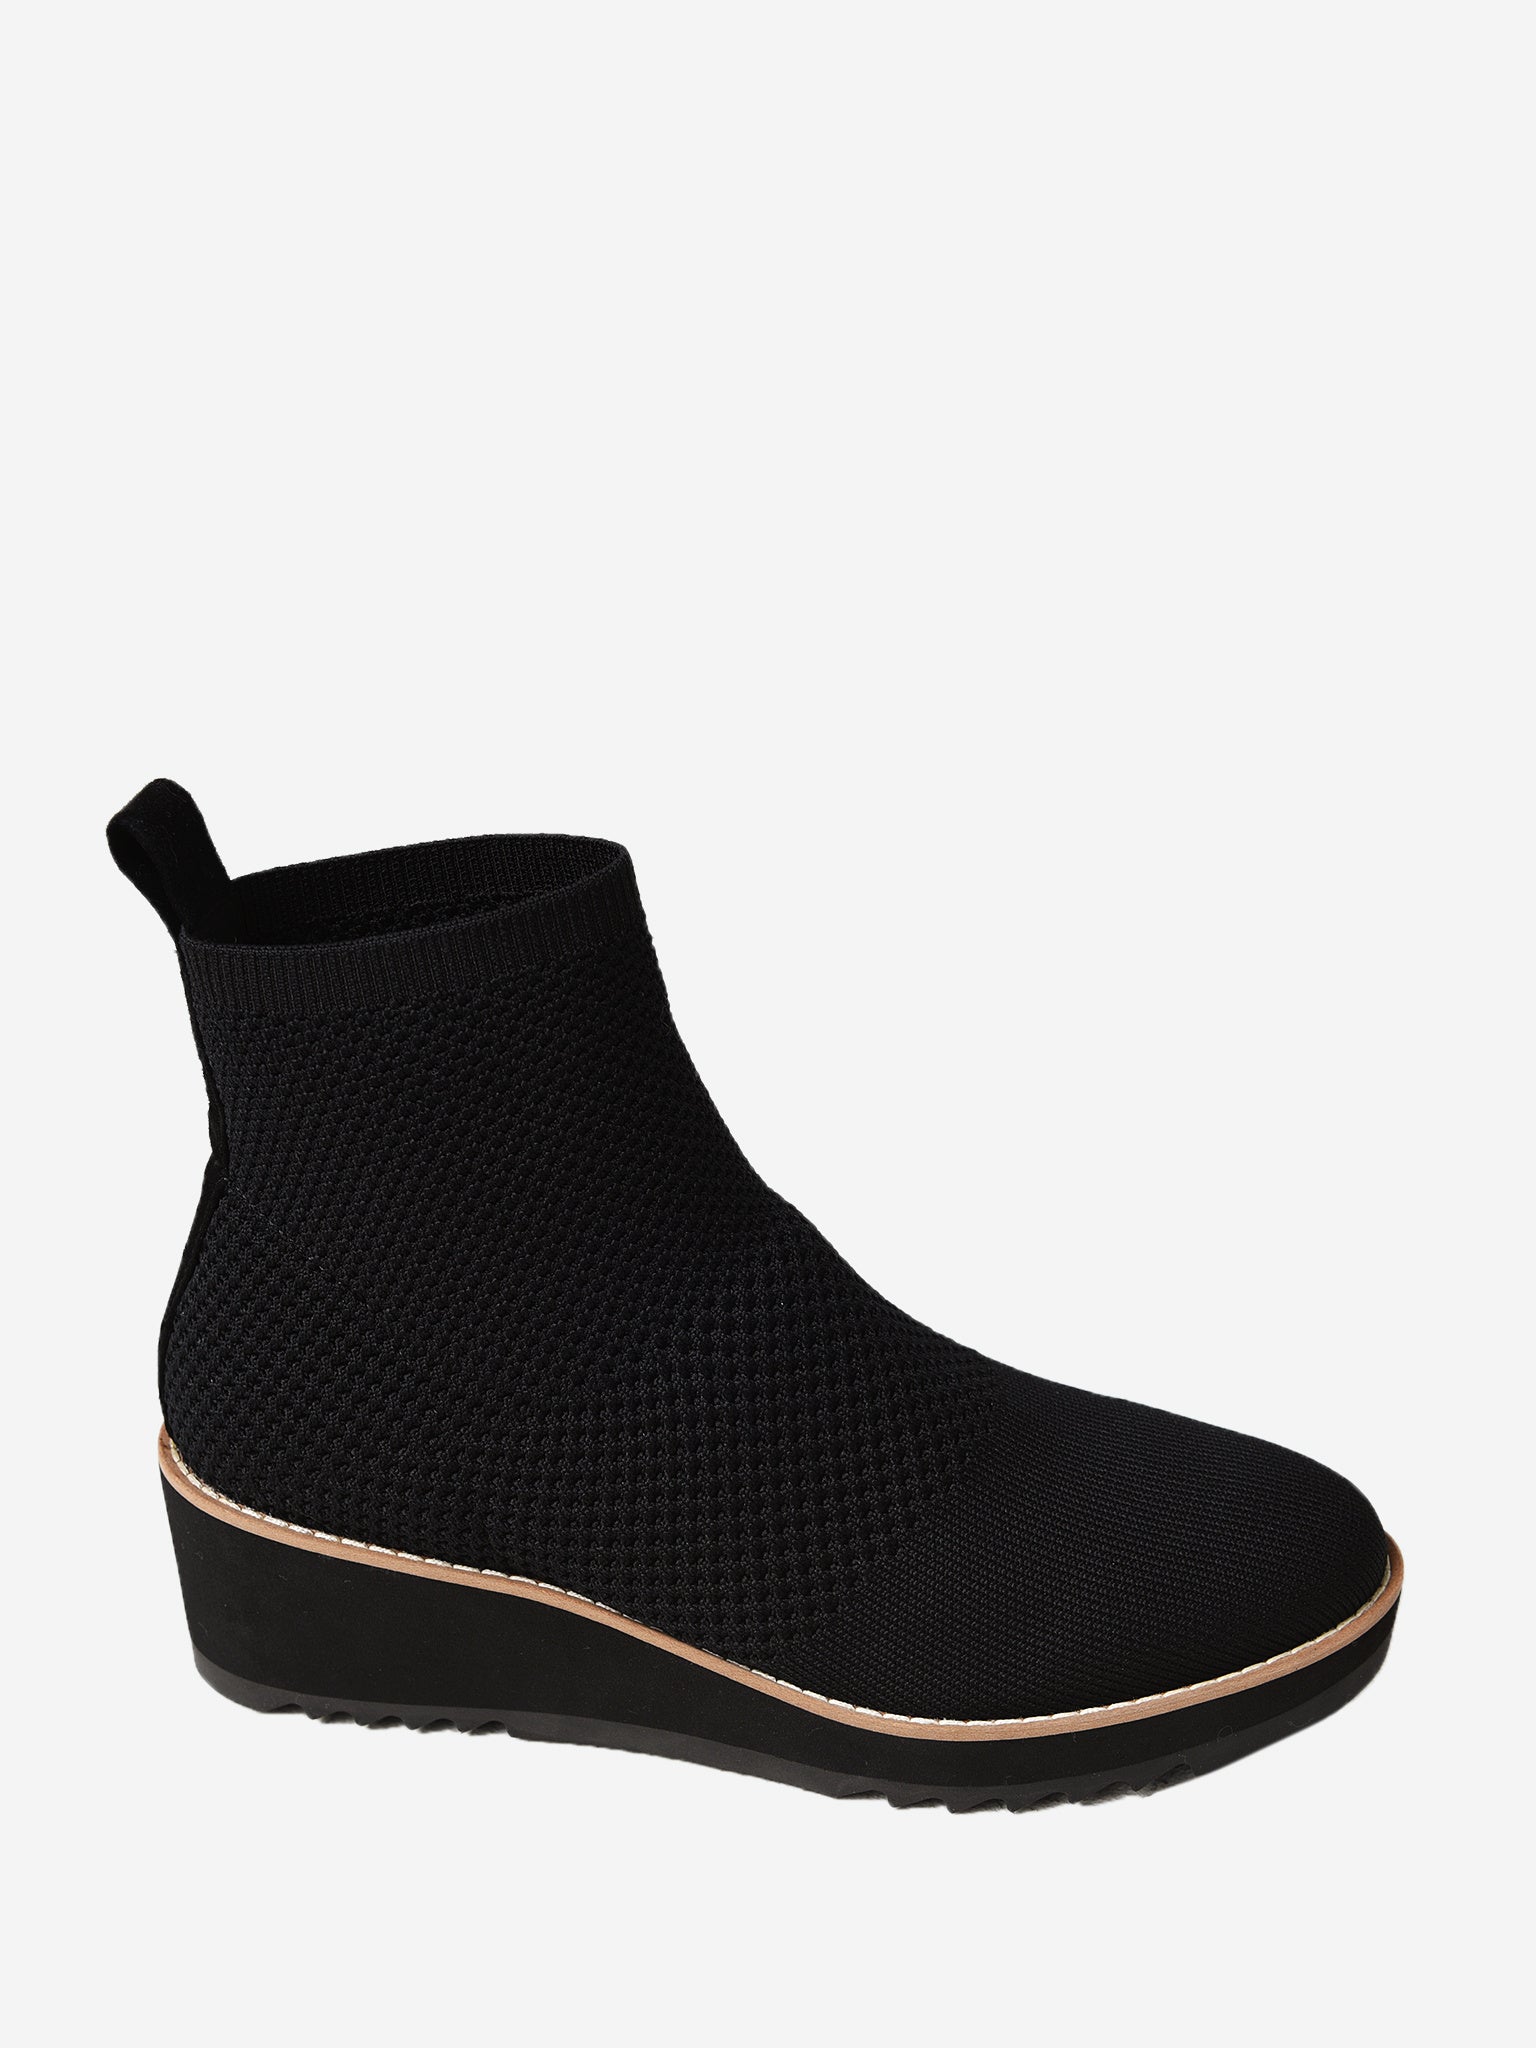 Eileen Fisher Shoes London Recycled Stretch Knit Bootie – saintbernard.com